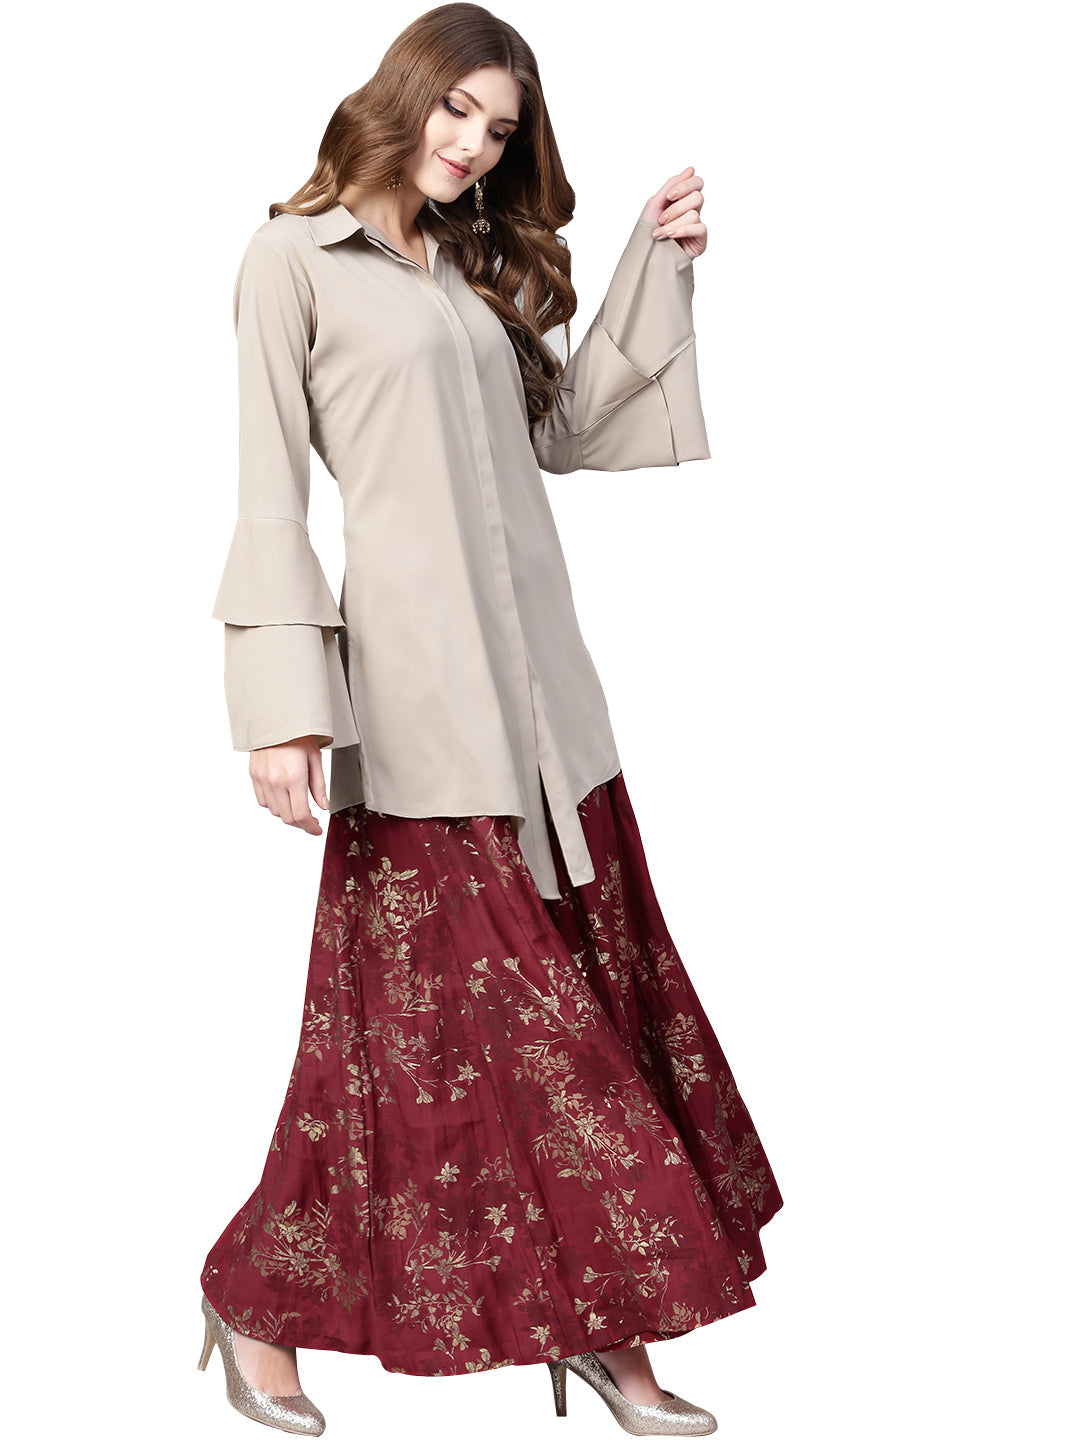 Beige & Maroon Shirt with Skirt Co-ord Set